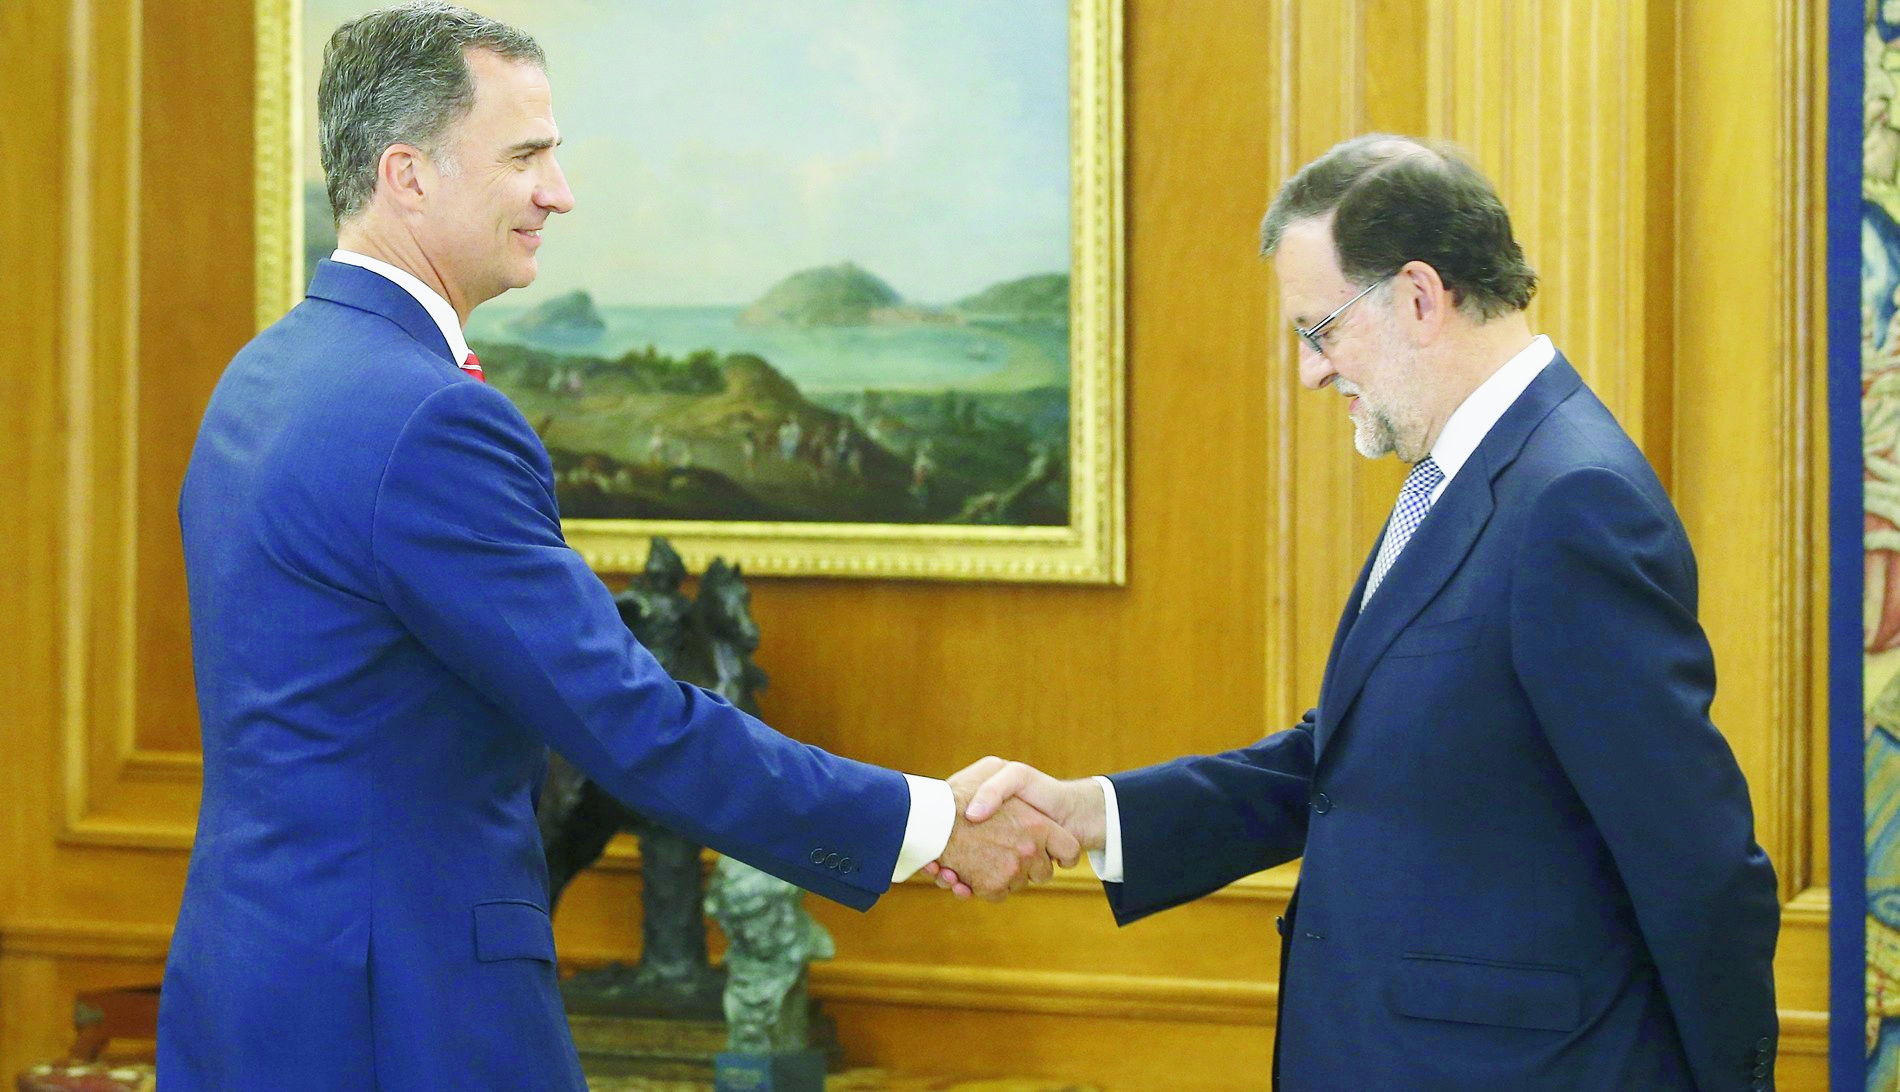 epa05445570 Spain's King Felipe VI (L) greets acting Spanish Prime Minister, Mariano Rajoy, at La Zarzuela Palace, in Madrid, Spain, 28 July 2016, as part of the round of talks with the representatives from Spanish parties, represented in Lower House of Spanish Parliament, aimed to check if there is a candidate with enough support to become in the next Spanish Prime Minister.  EPA/Angel Diaz / POOL SPAIN ROYALTY